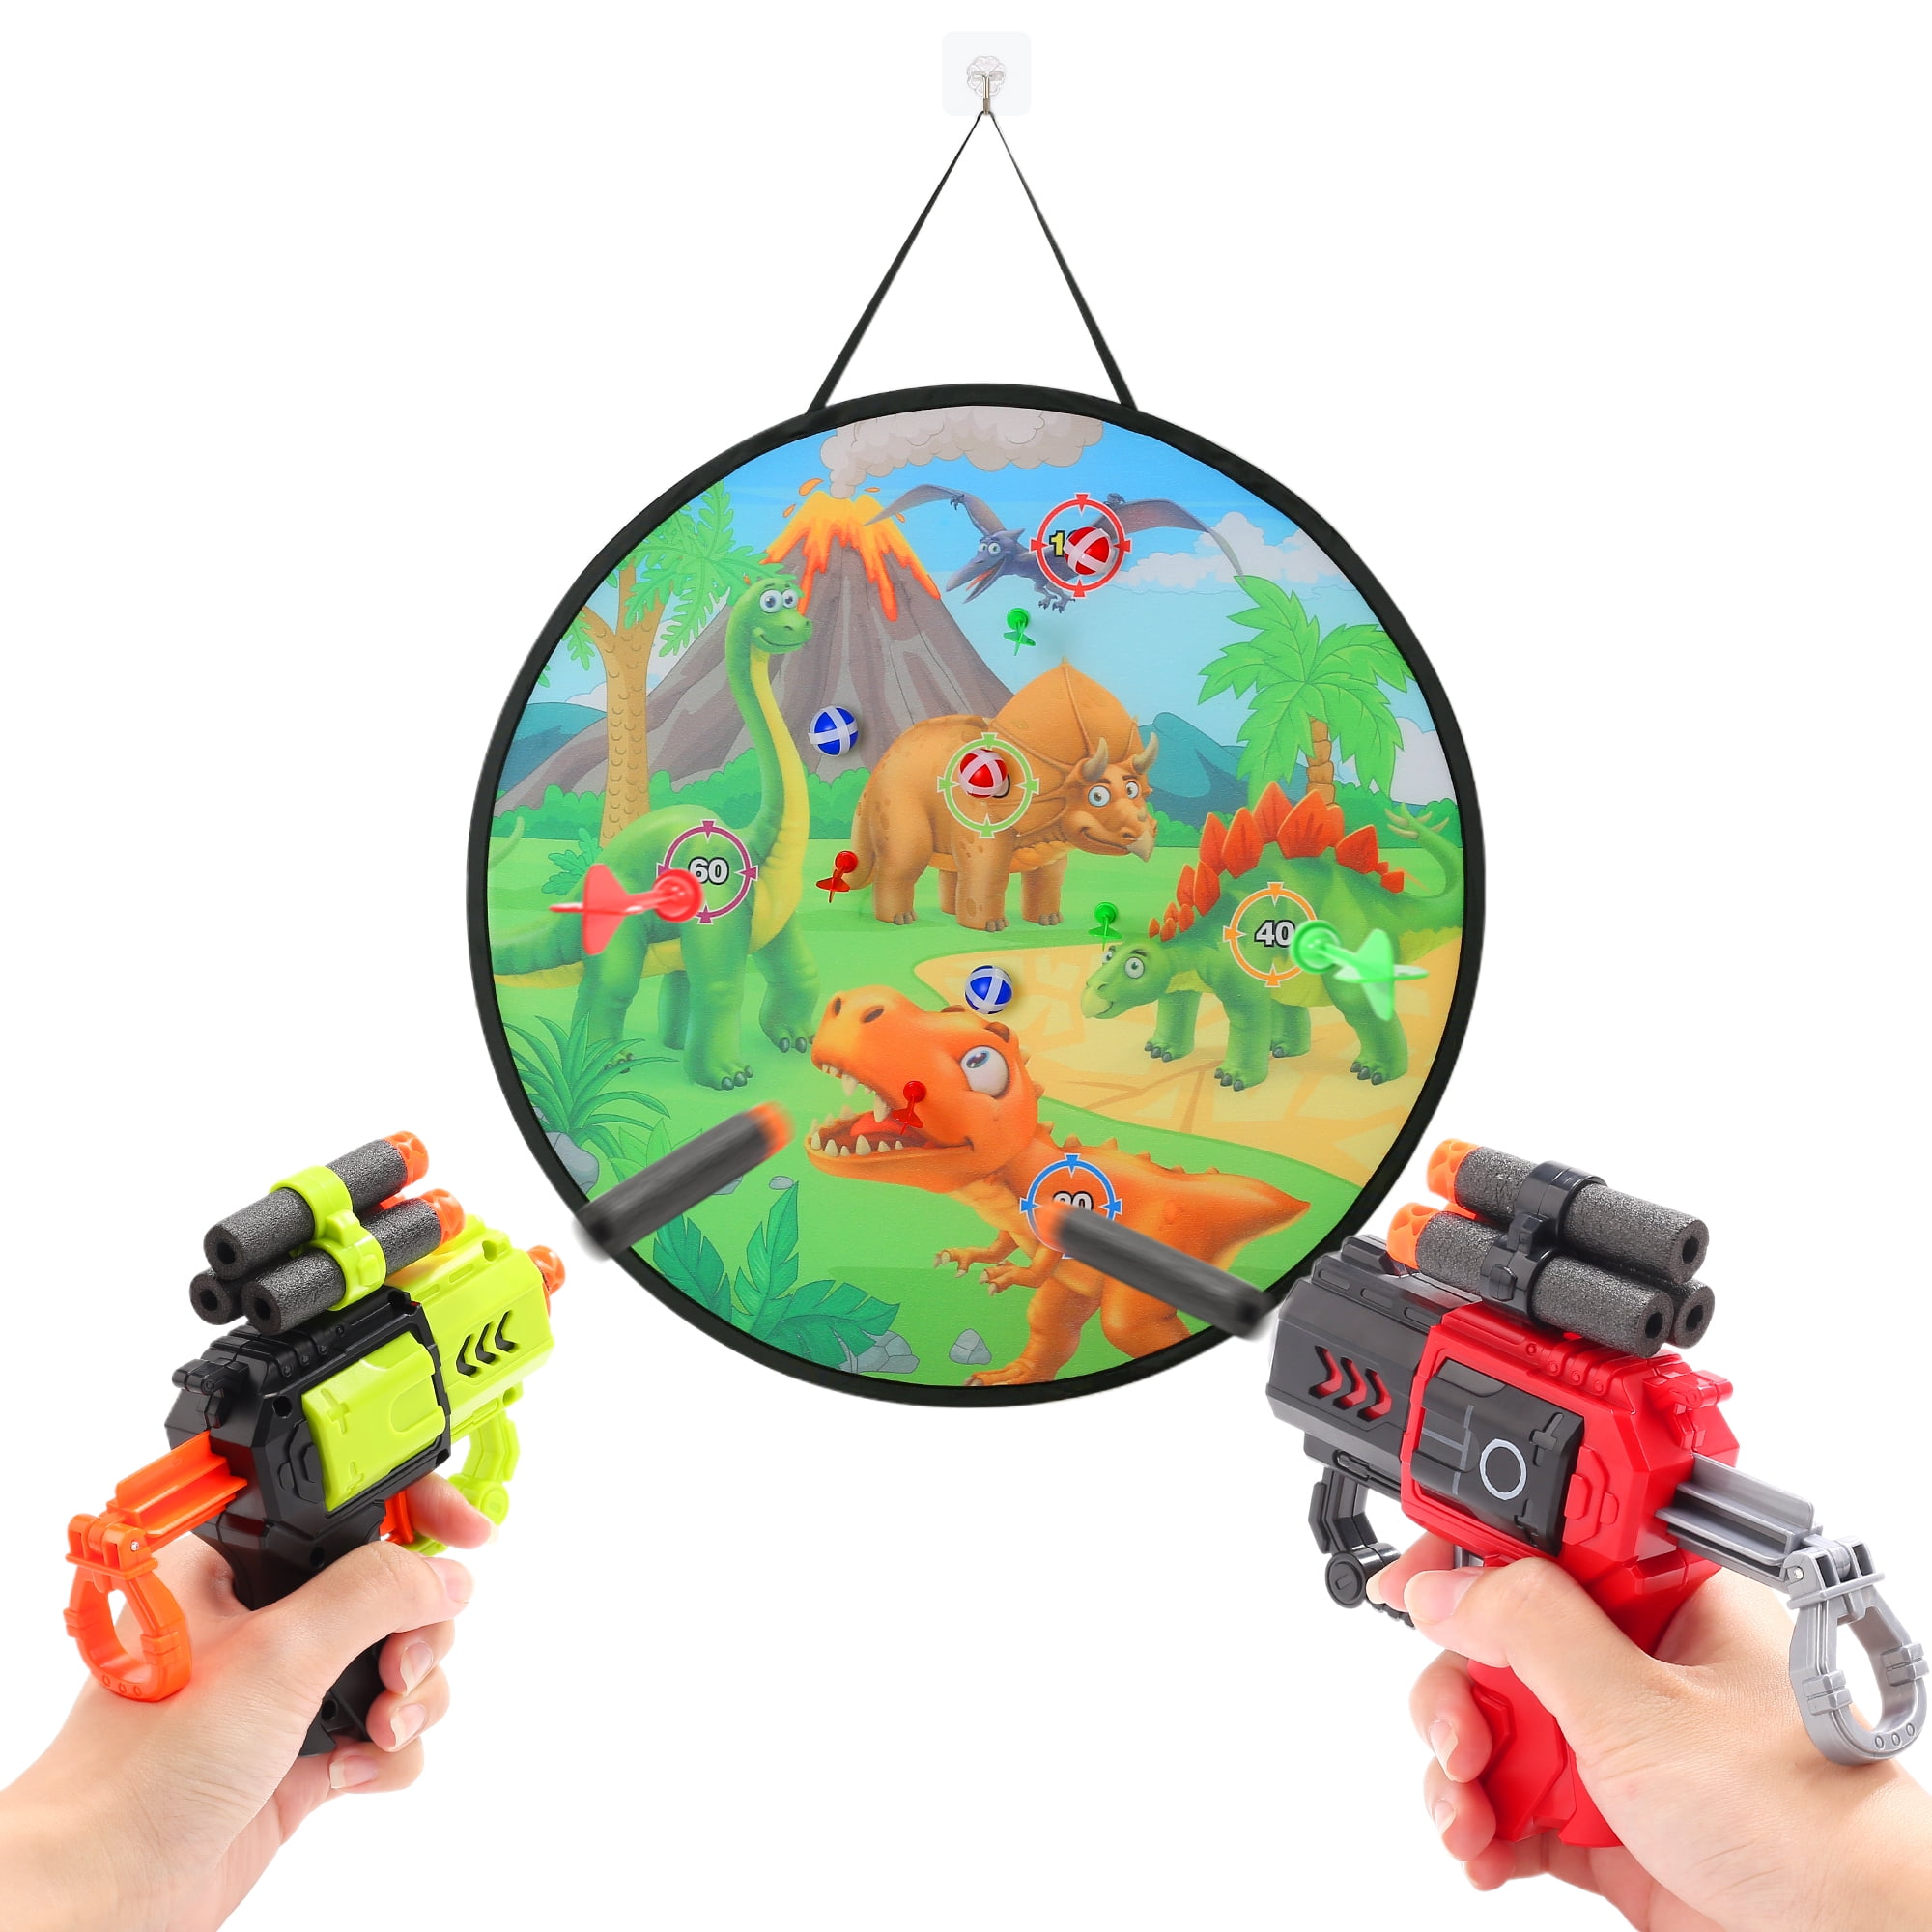 Dinosaur Shooting Game Toy Outdoor Toss Games, Shooting Target with 2 Foam Dart Blasters Kid Indoor Activity Home Party Supplies, Boys Girls Birthday Gifts for 3-8 Years Old